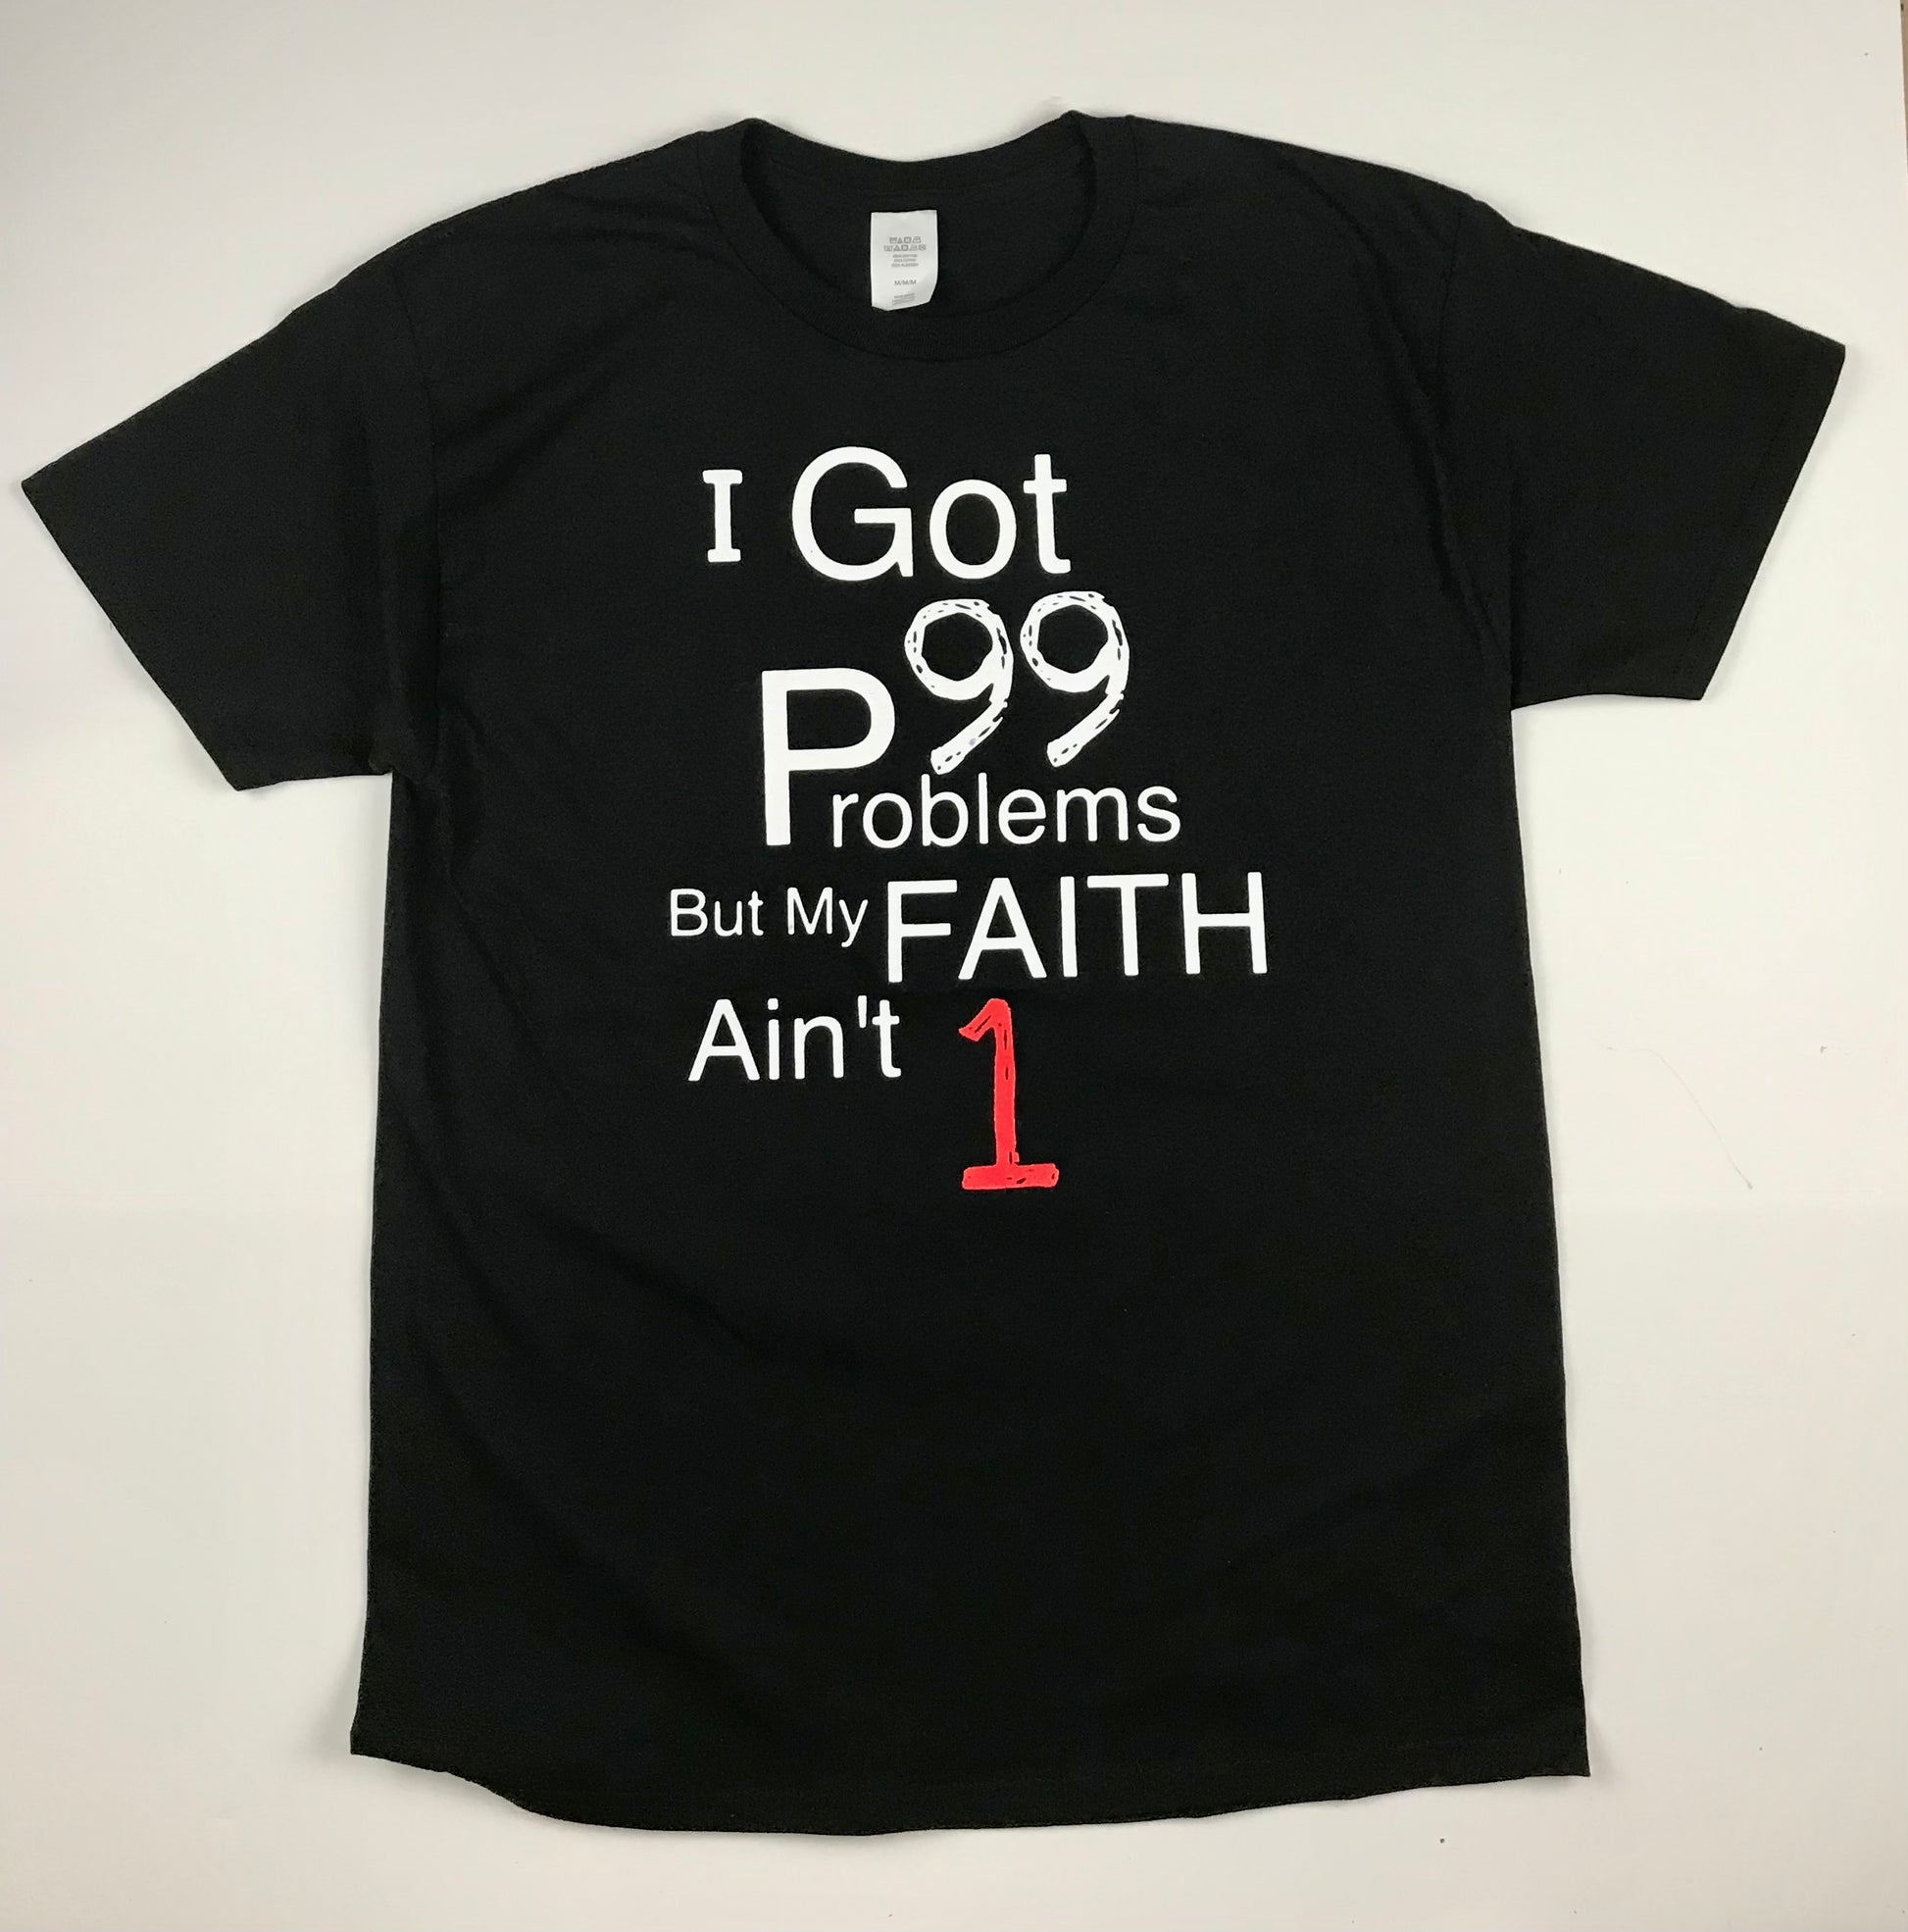 Buy Christian T-Shirts Online - Shop for Limited "99 Problems" – Mark Truth Collection